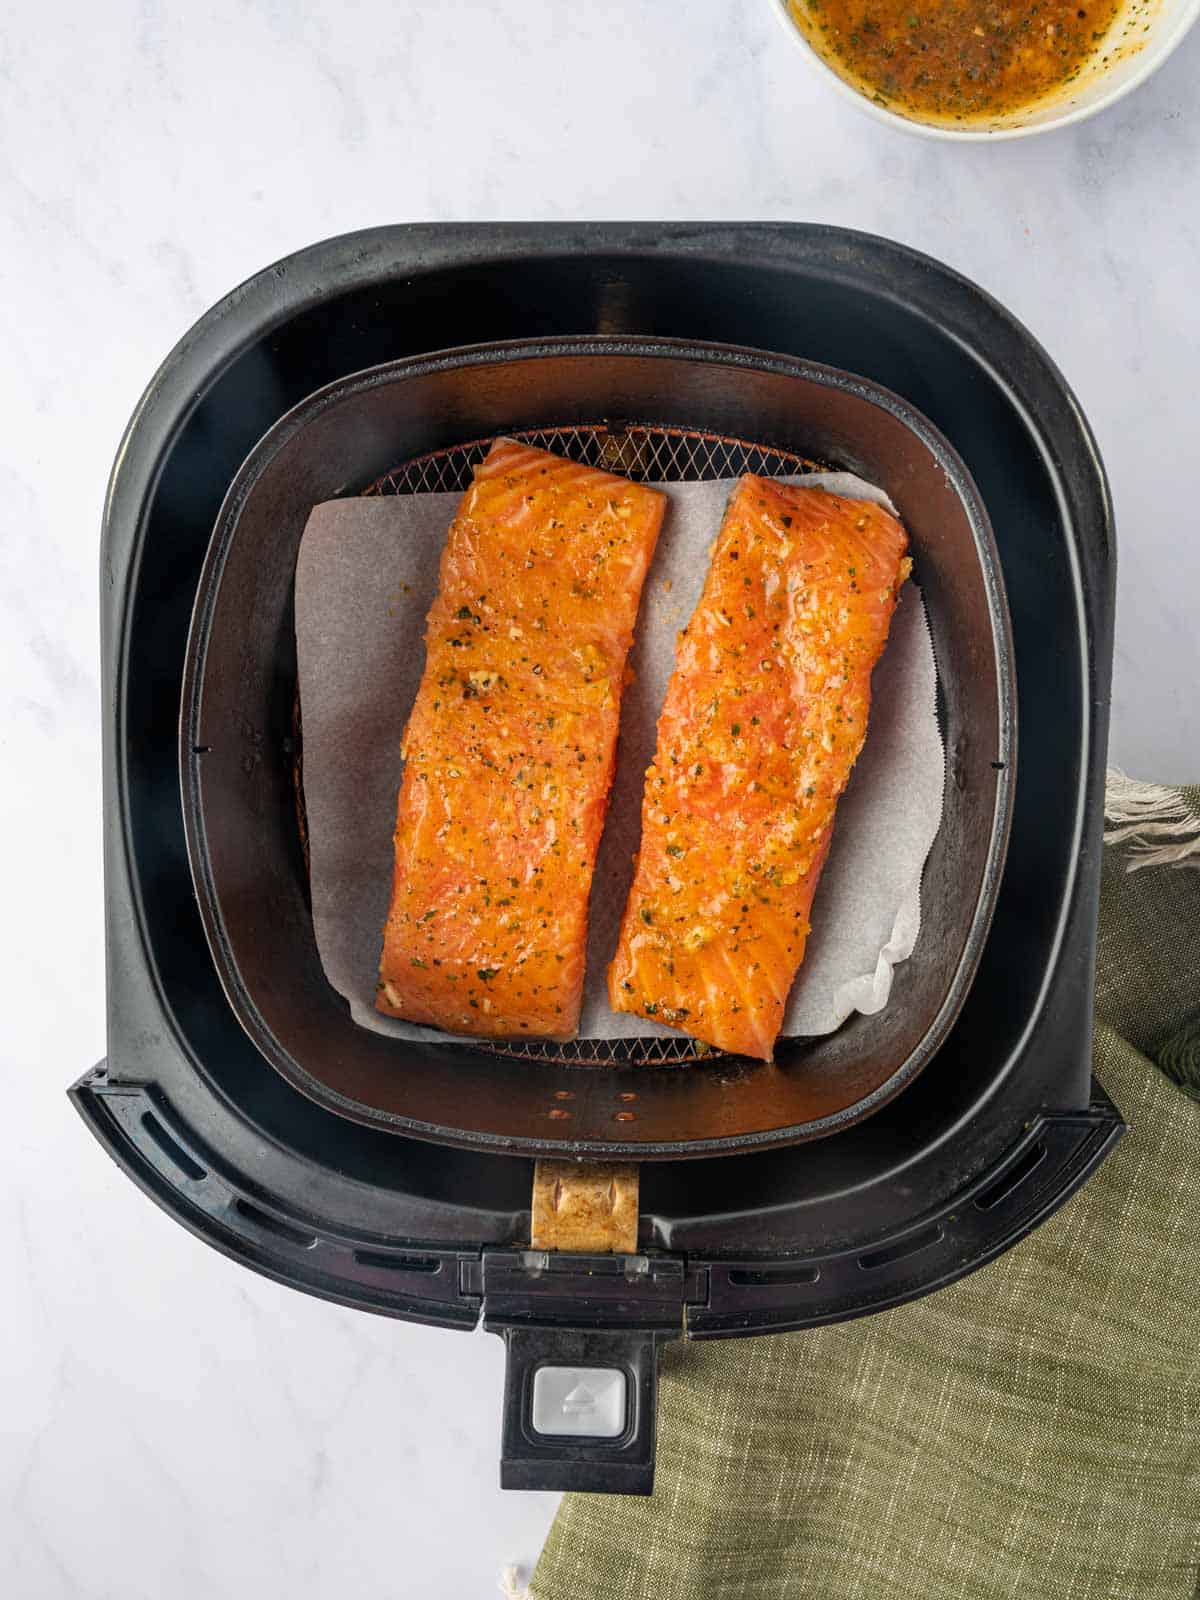 Marinated salmon filets in an air fryer basket.